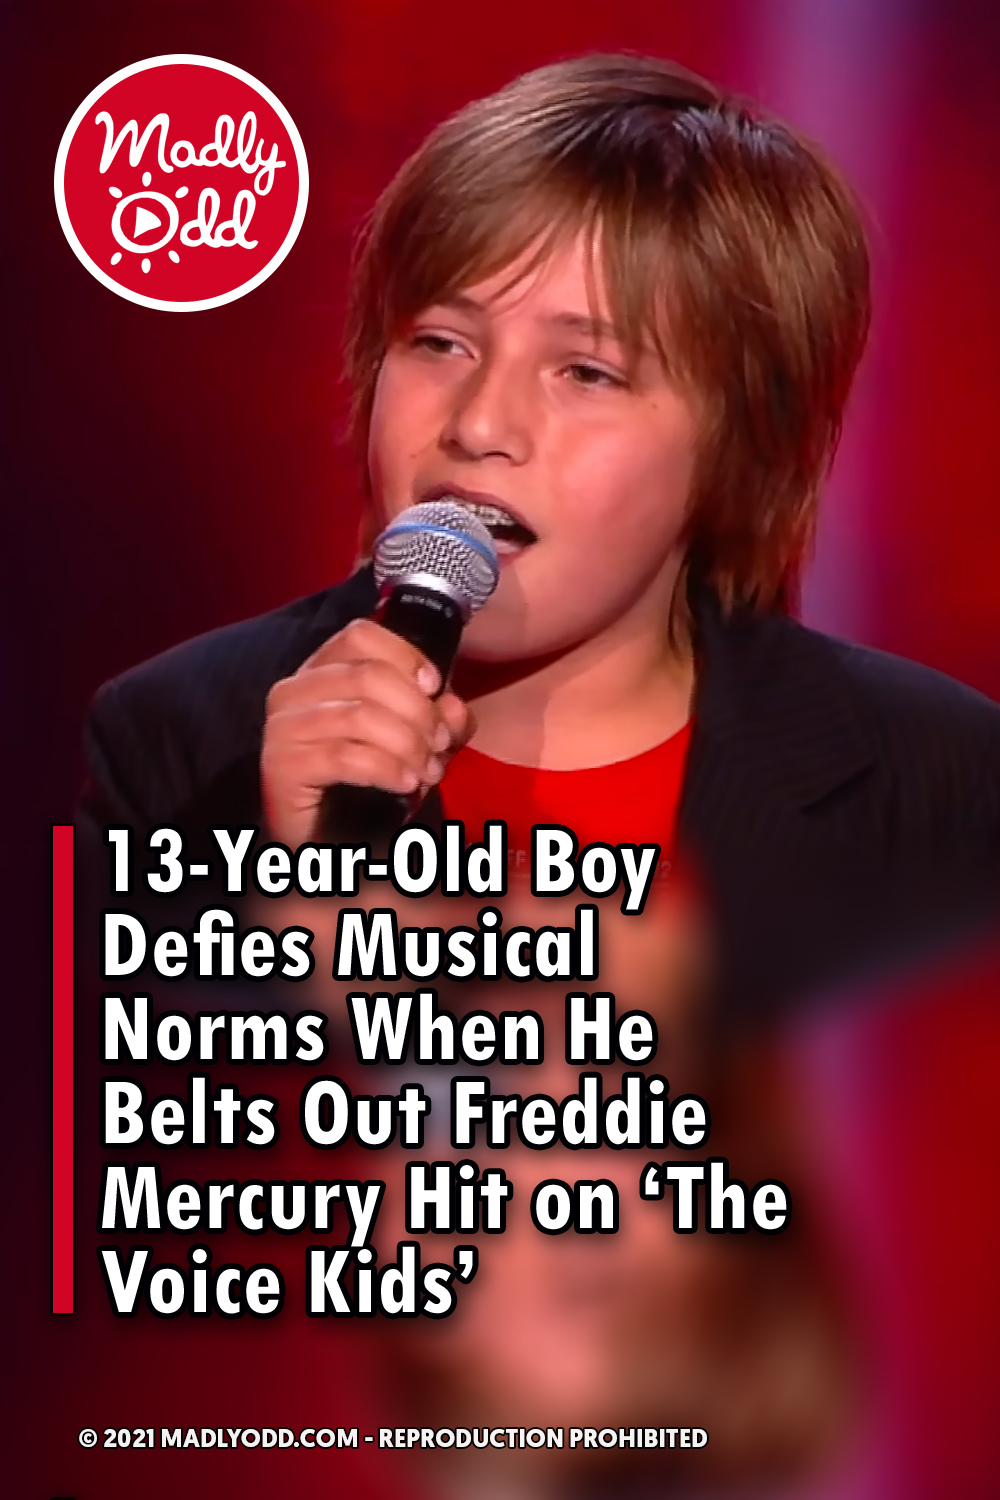 13-Year-Old Boy Defies Musical Norms When He Belts Out Freddie Mercury Hit on \'The Voice Kids\'